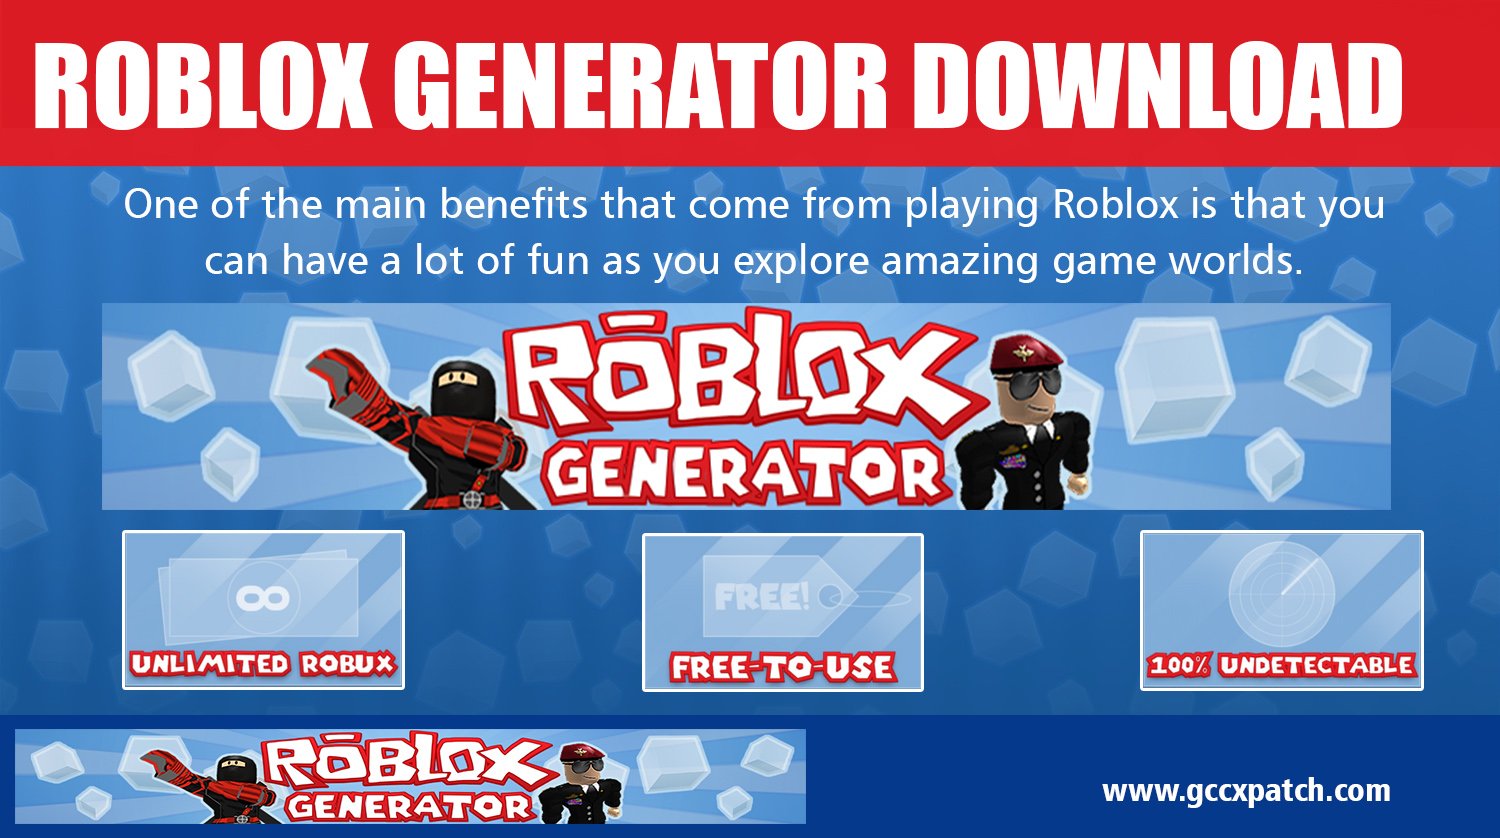 Robux Generator On Twitter You Can Get Roblox Generator Safely With This Tool At Https T Co G0ord9e6kq Service Robux Generator Free Robux How To Get Free Robux How To Get Robux For Free Easy - unlimited robux generator 2018